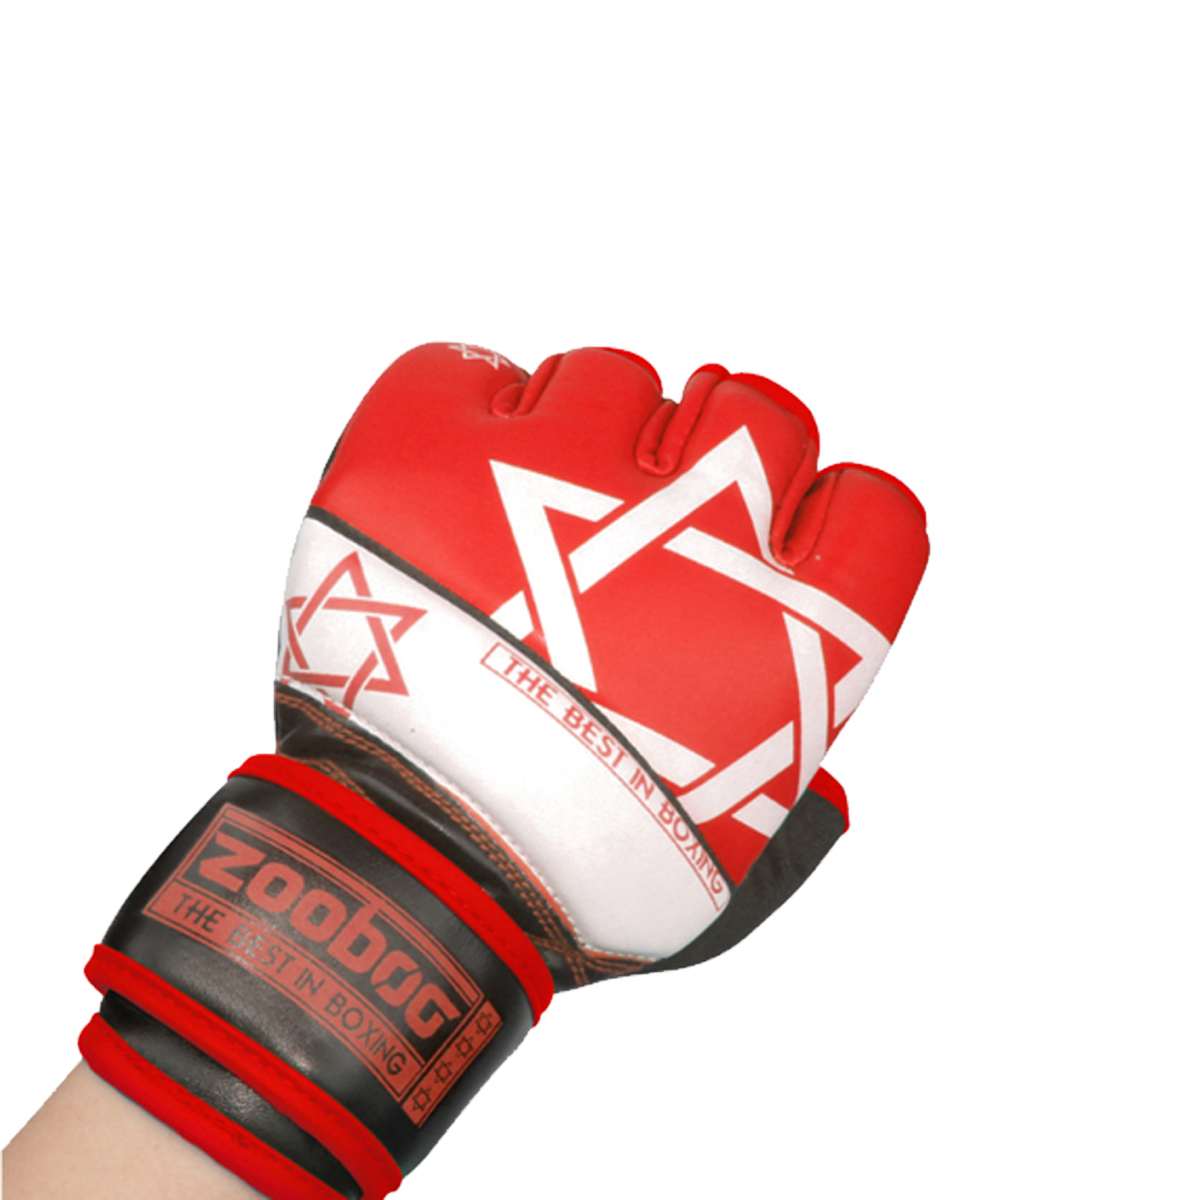 ZOOBOO-Boxing-Gloves-Training-Gloves-Sparring-Mitts-Slimming--Exercising-Boxing-Gloves-1637308-9